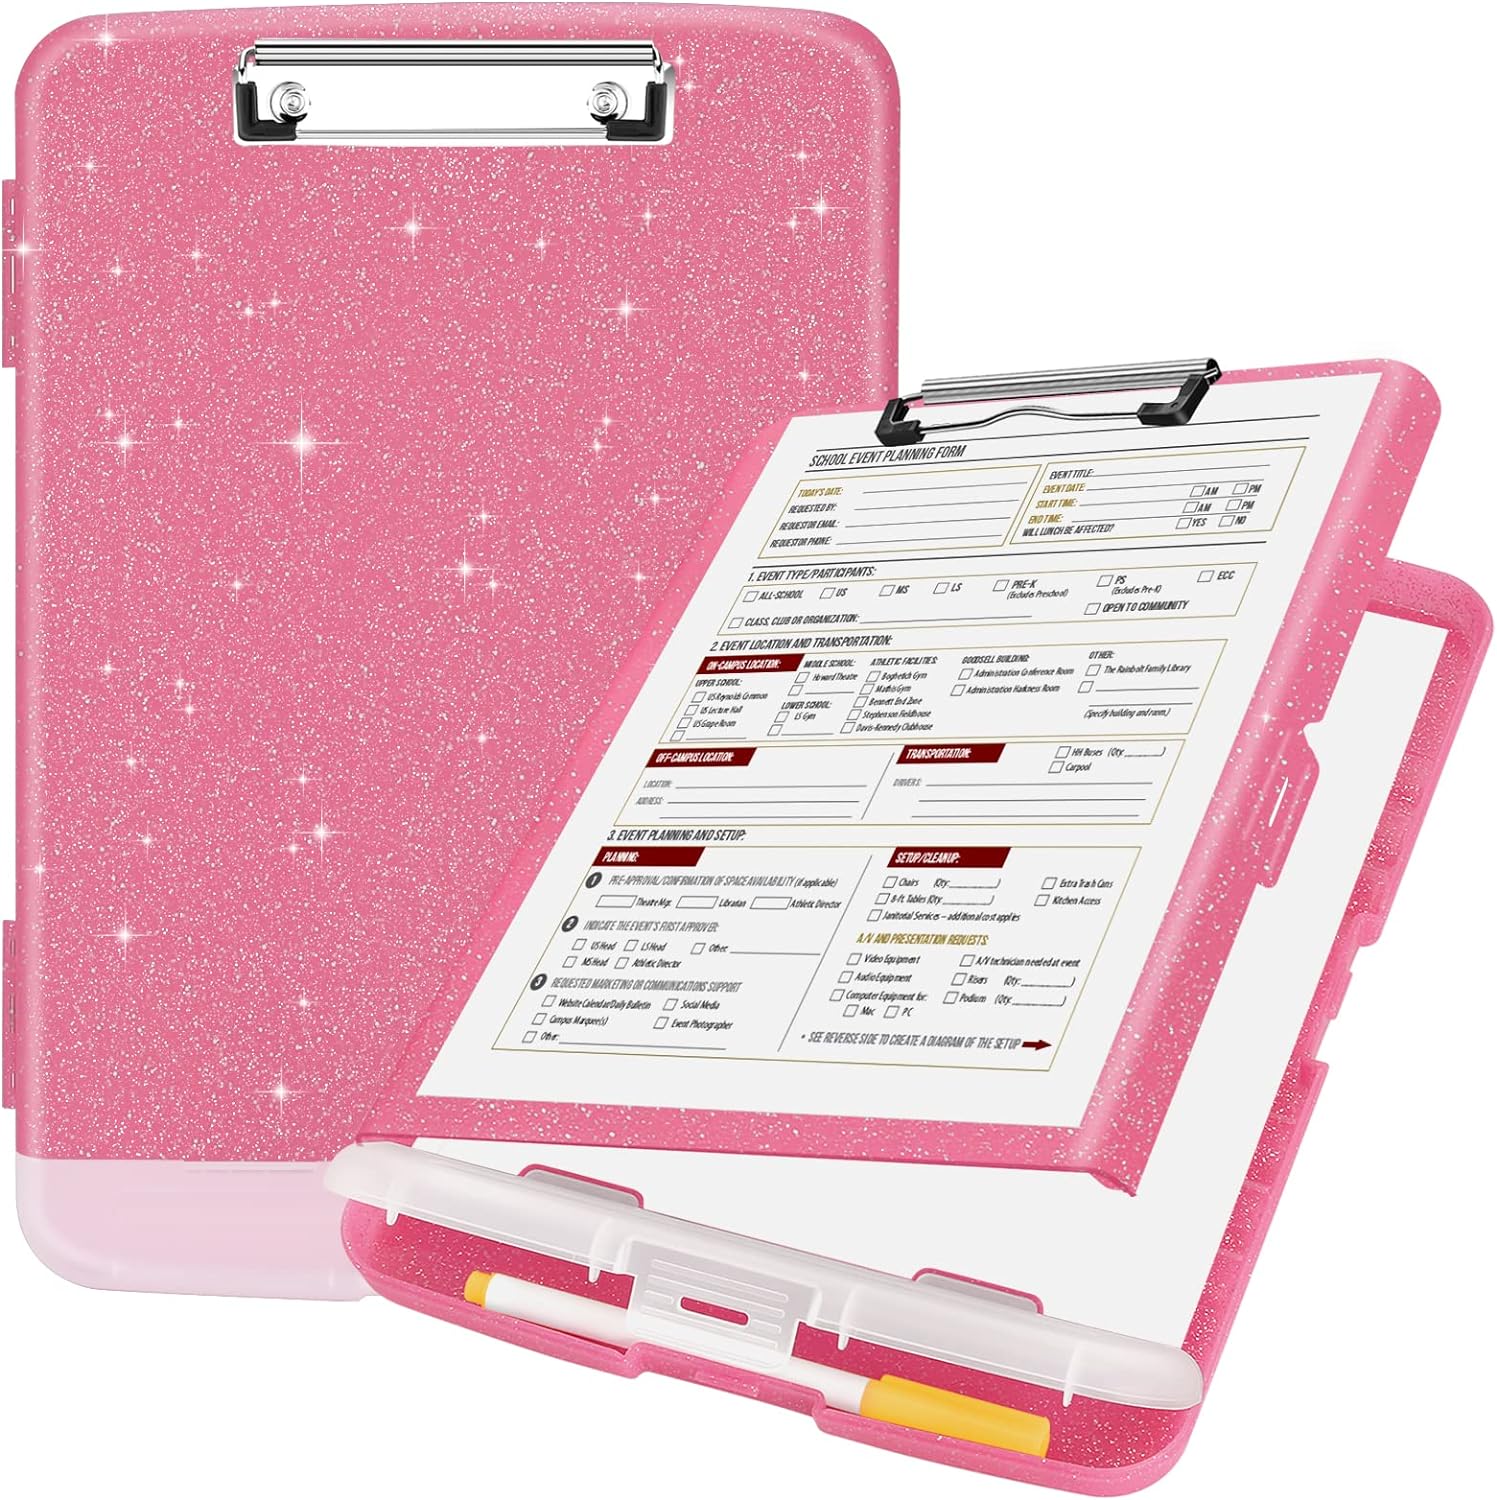 Sooez Glitter Clipboard with Storage, High Capacity Storage Clipboard with Pen Holder, Cute Clip Boards 8.5x11 with Low Profile Clip, Sparkle Plastic Clipboard Case Box for Women & Kids, Side Opening